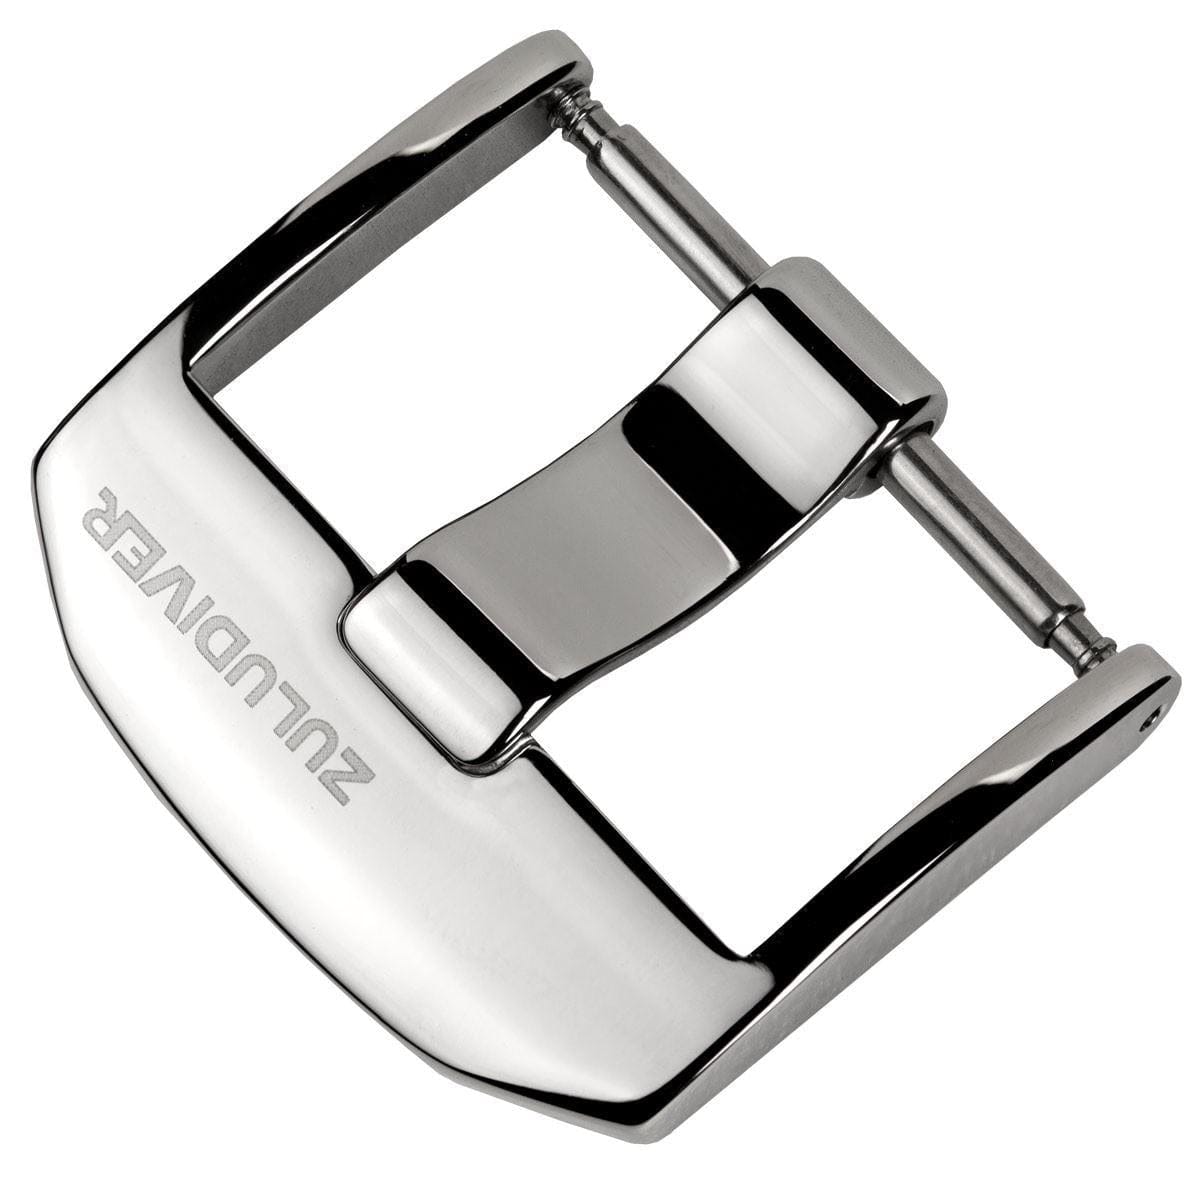 Replacement Buckle for Diver's Style Strap by ZULUDIVER - Polished